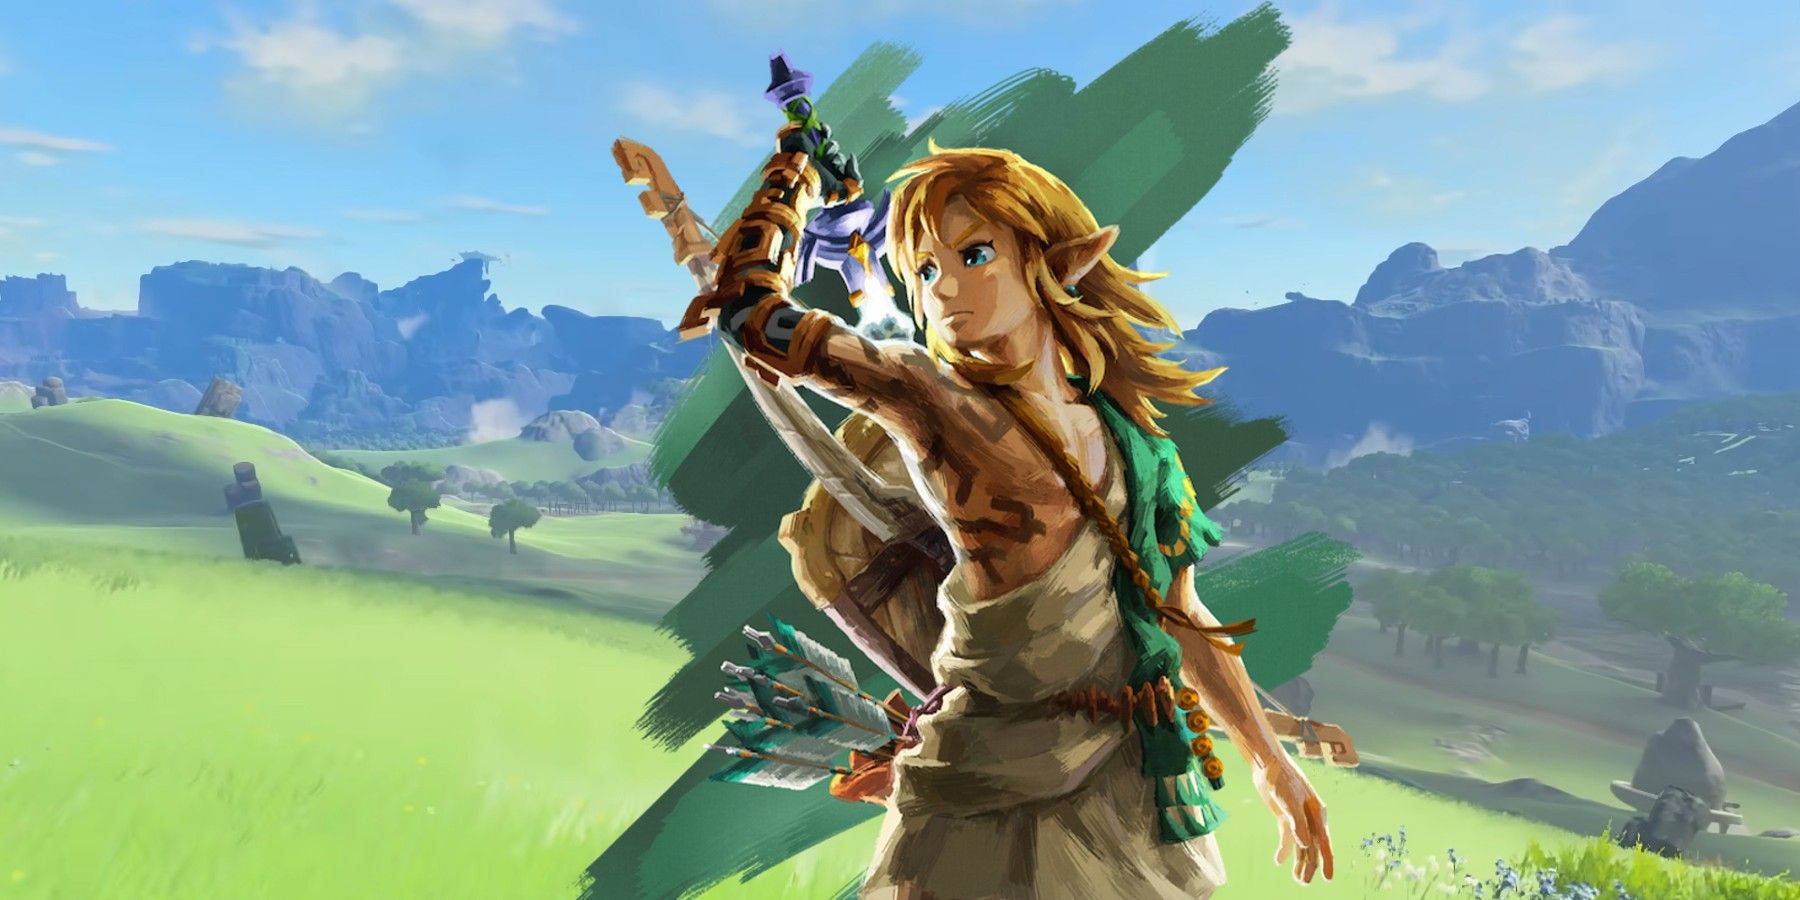 Official art of Link in The Legend of Zelda: Tears of the Kingdom against a background of Hyrule countryside.